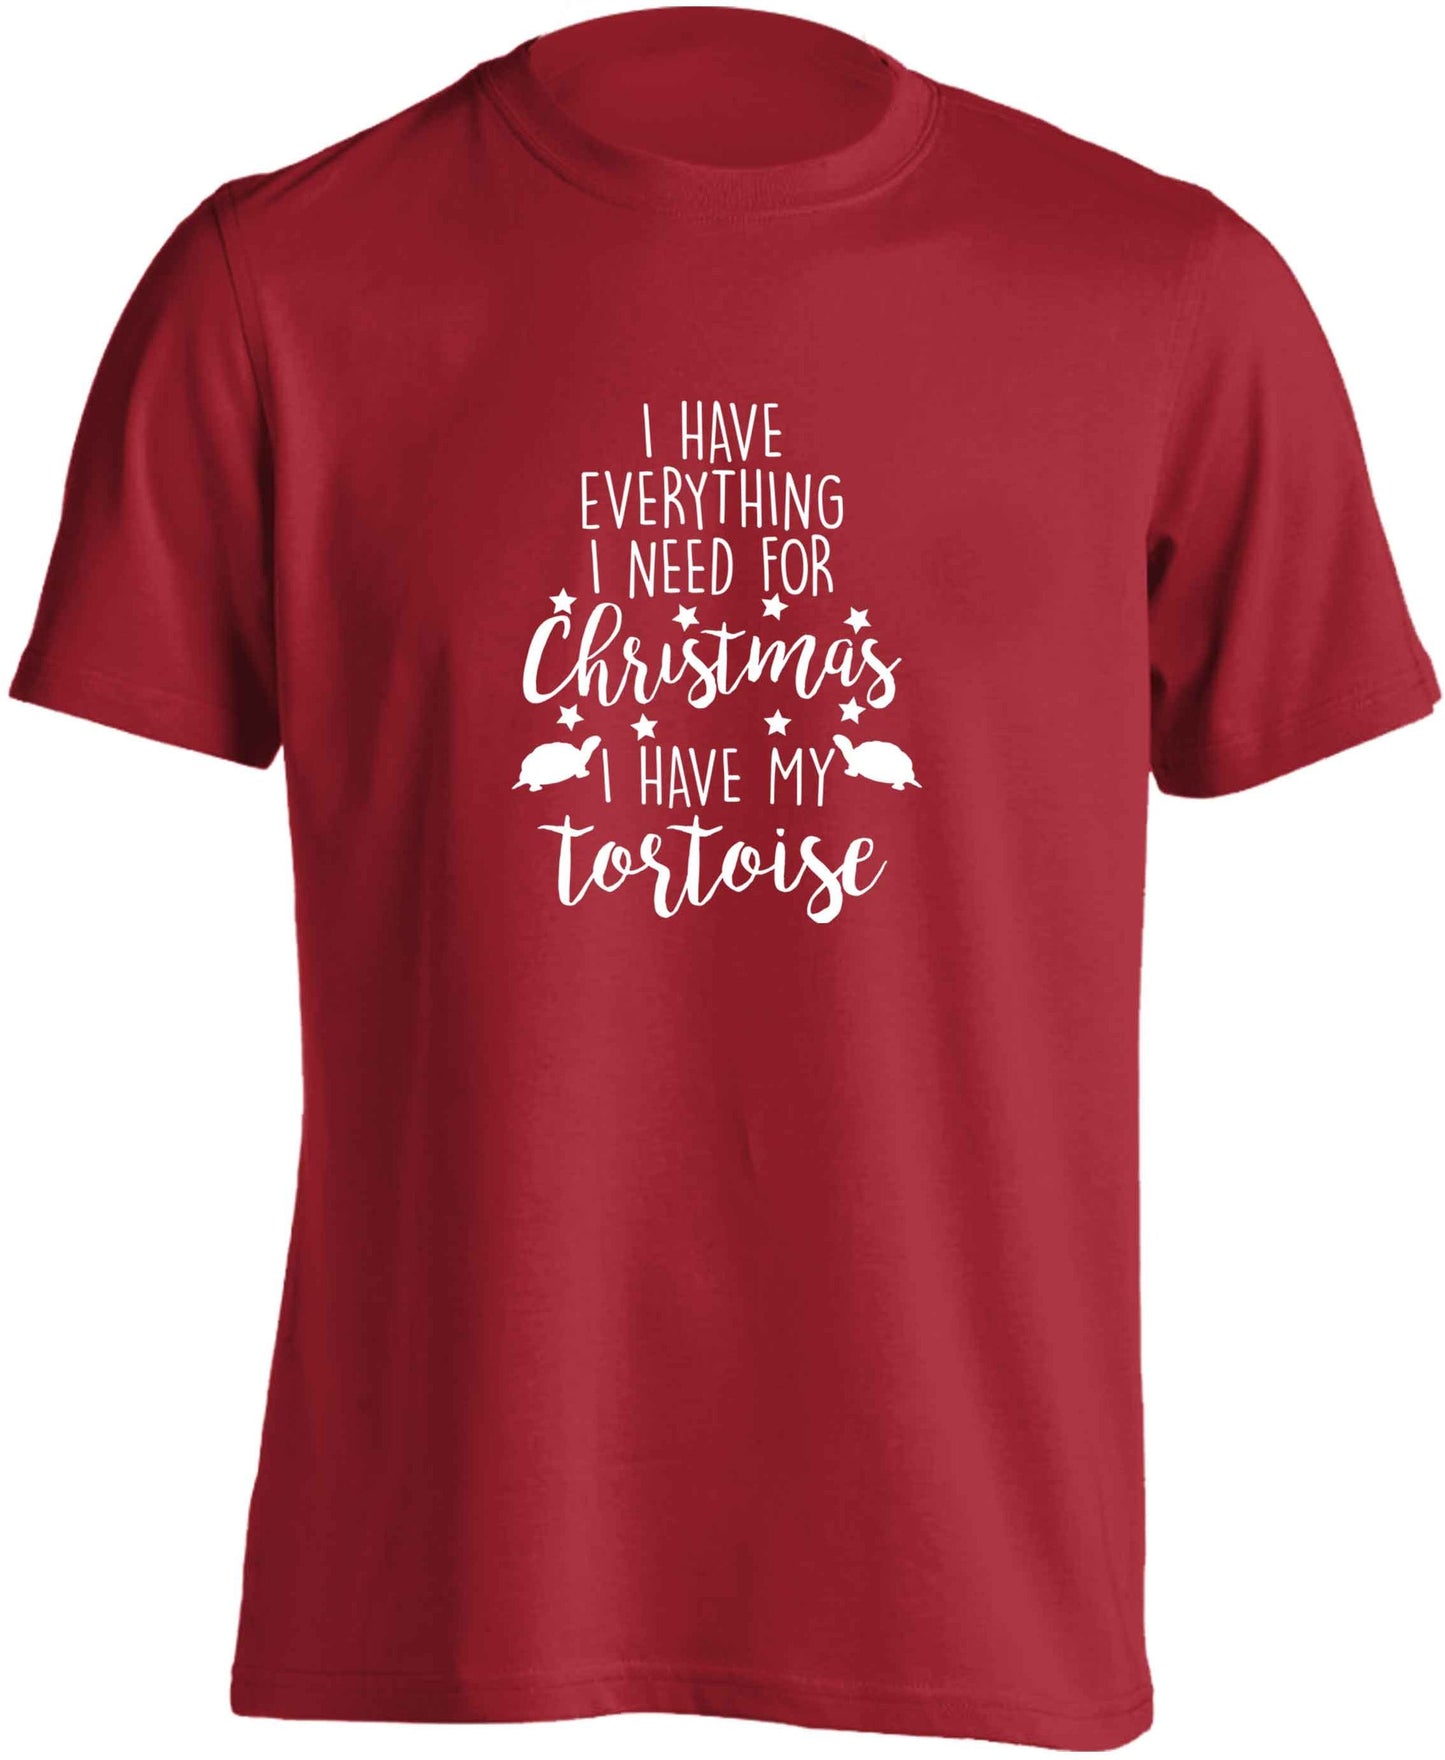 I have everything I need for Christmas I have my tortoise adults unisex red Tshirt 2XL